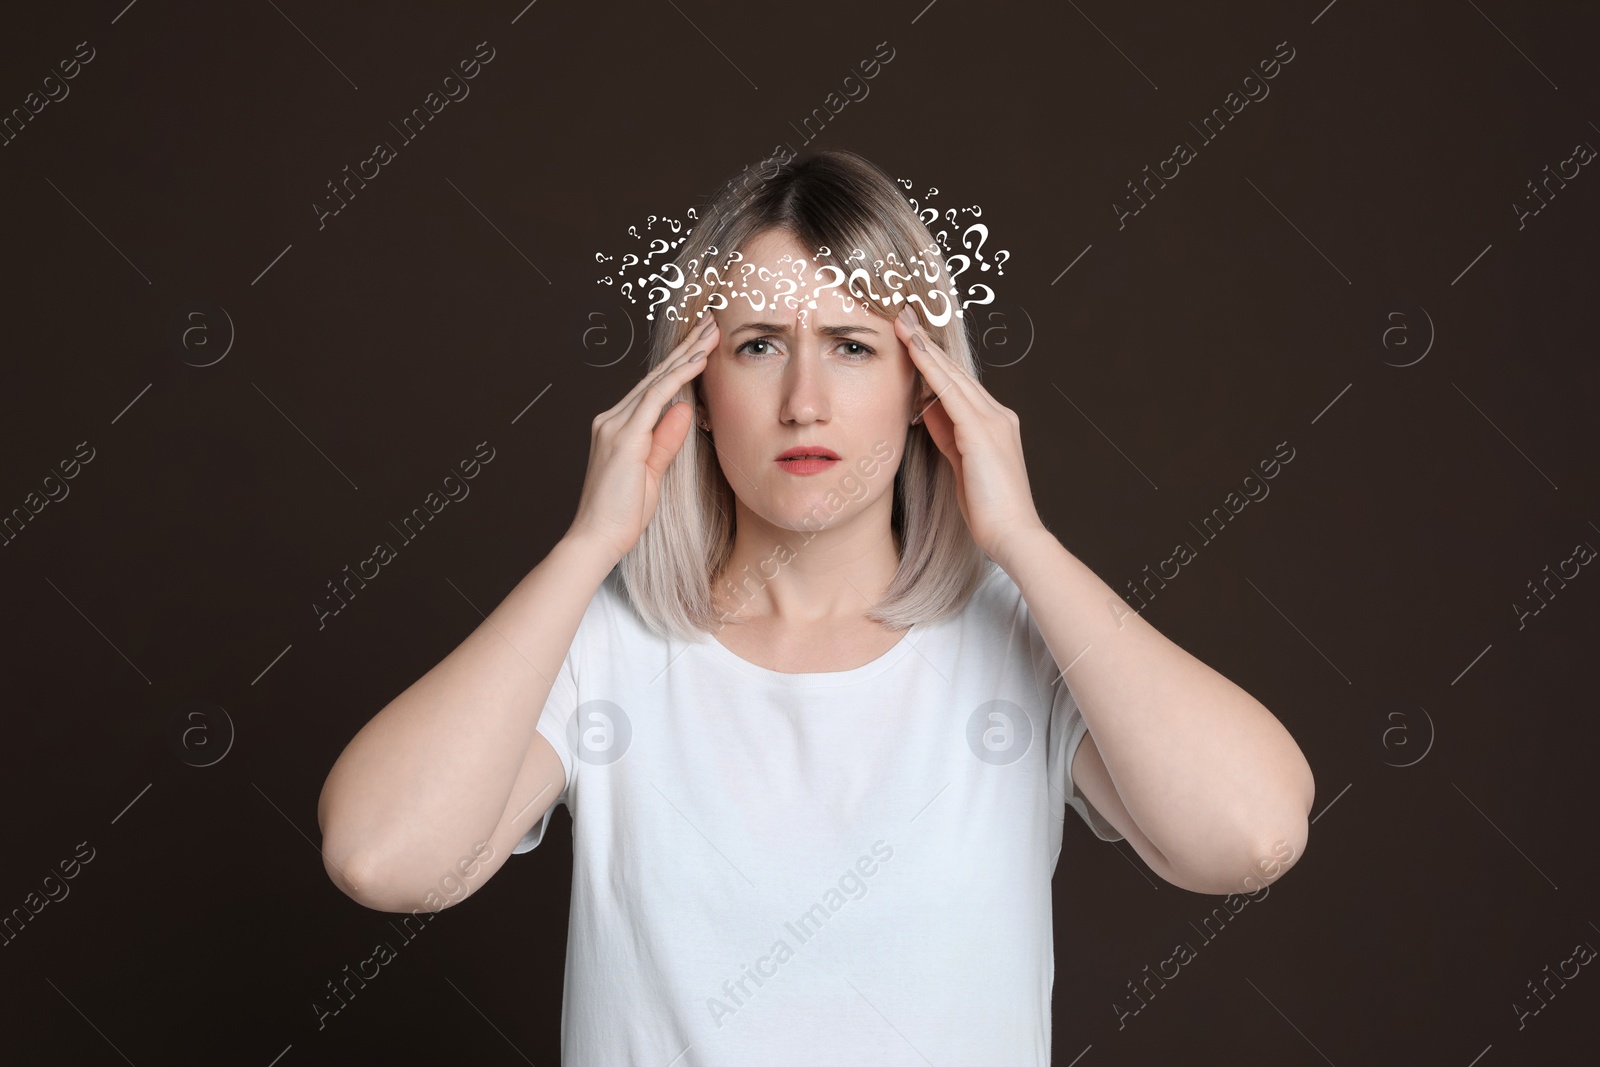 Image of Amnesia concept. Woman trying to remember something on dark background. Wreath of question marks symbolizing memory loss